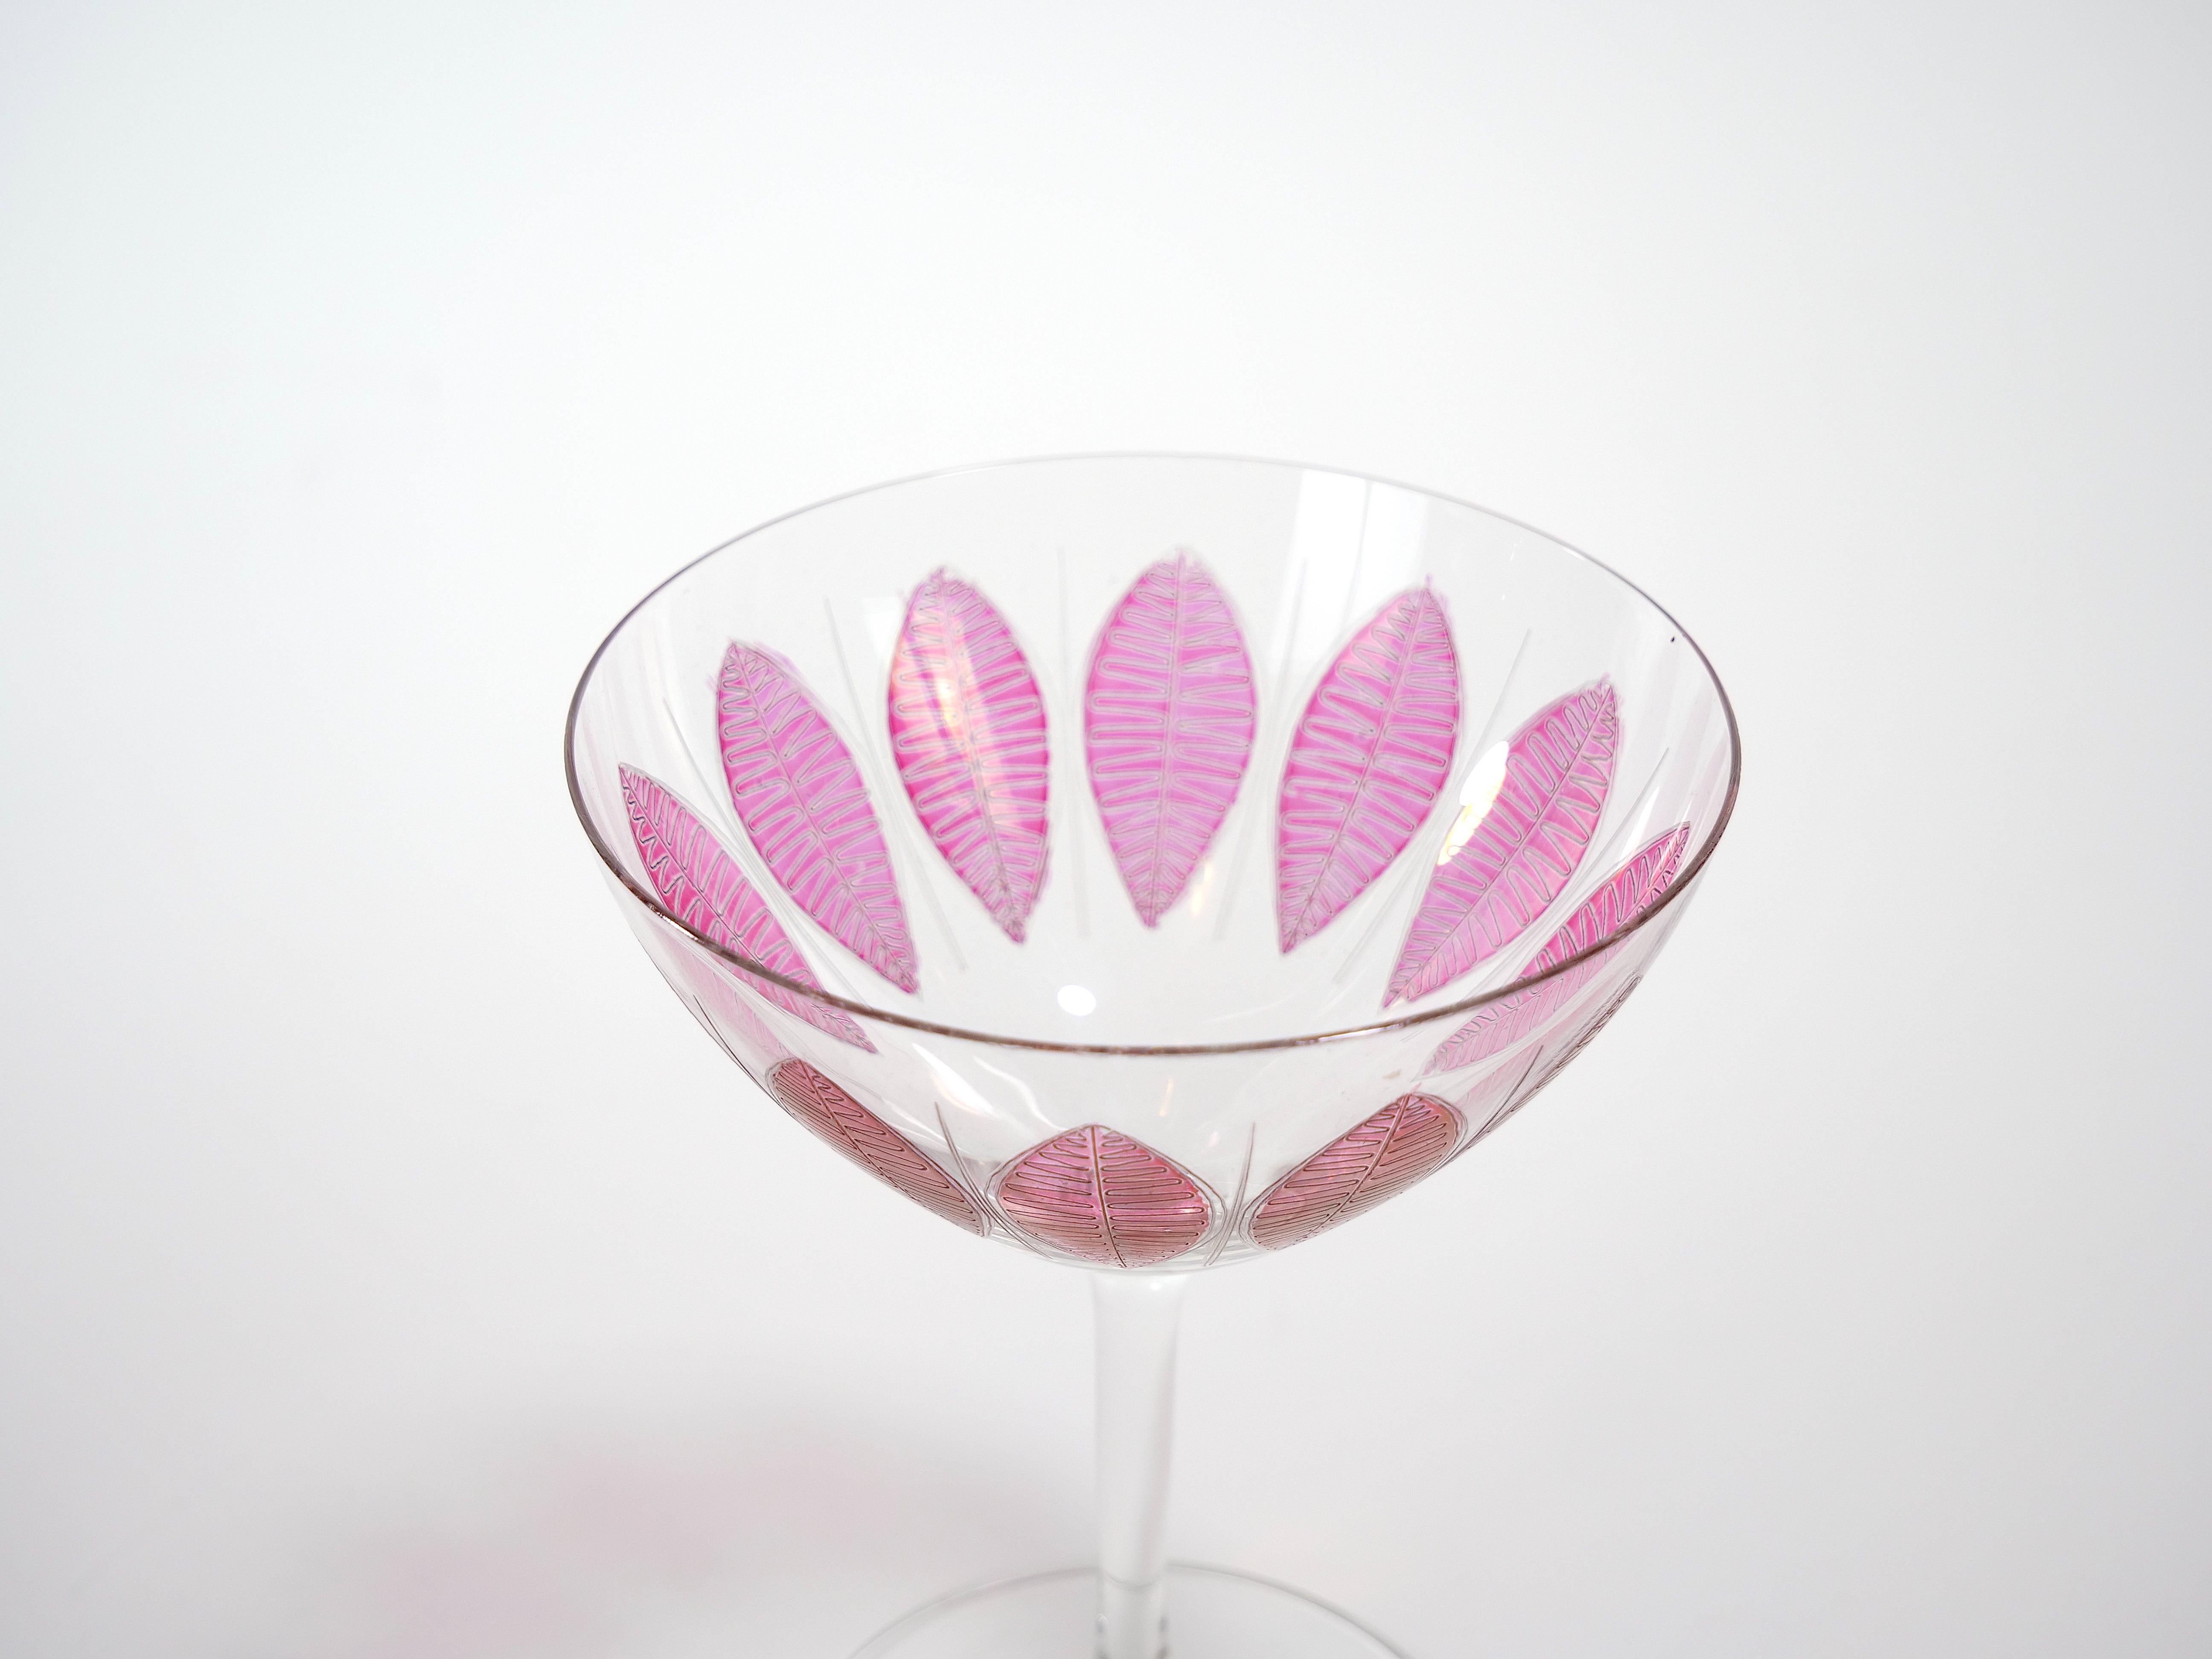 Hand Painted Crystal Champagne Coupe Service / Ten People For Sale 2